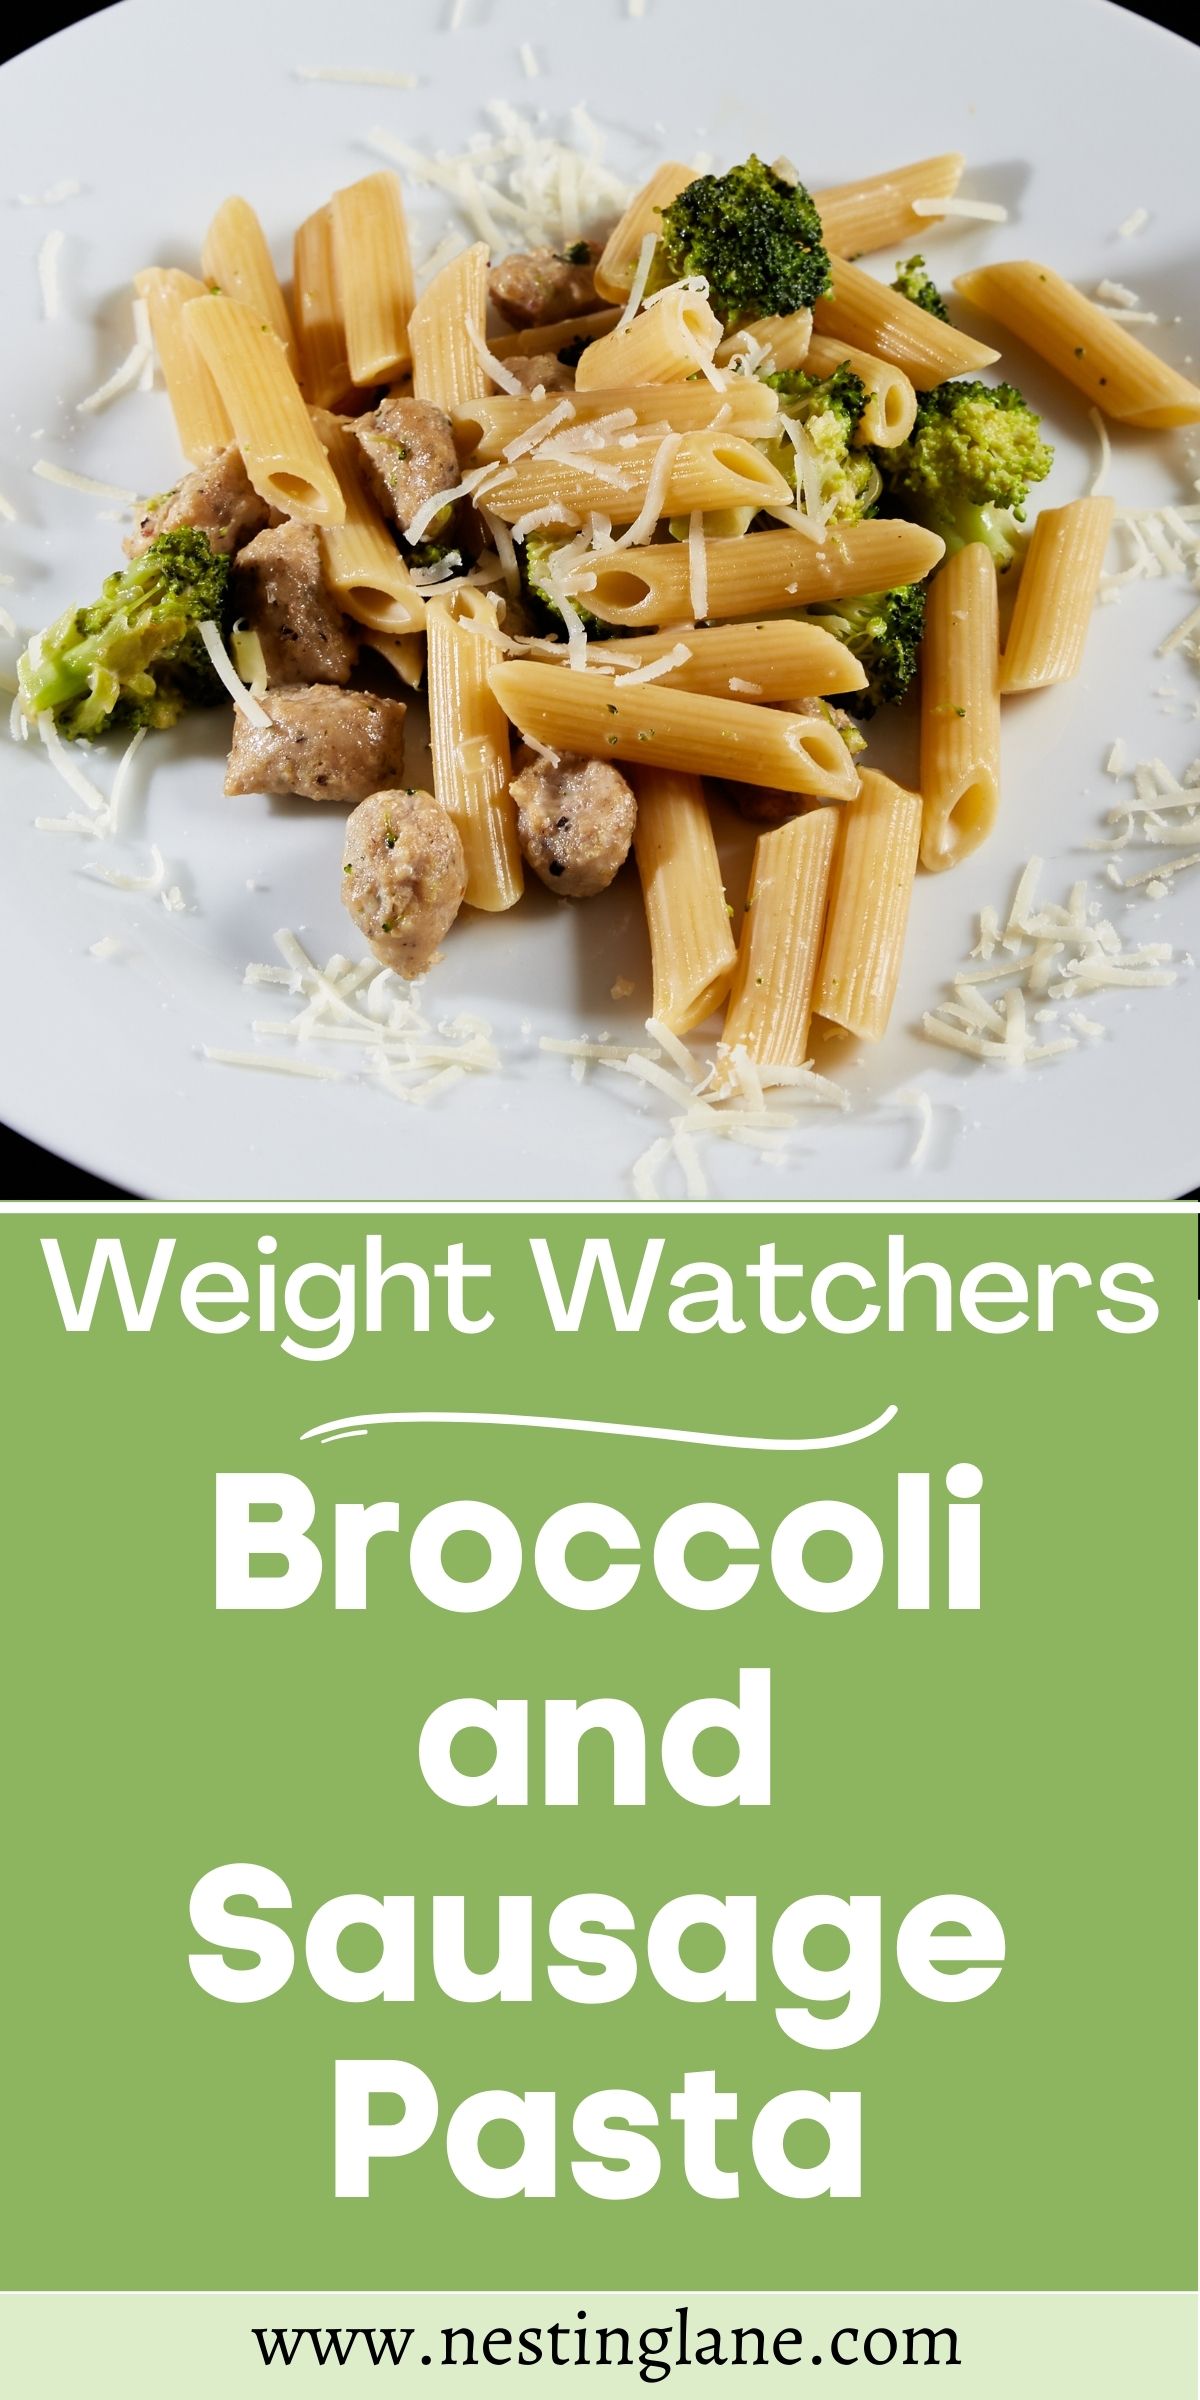 Graphic for Pinterest of Weight Watchers Broccoli and Sausage Pasta Recipe.